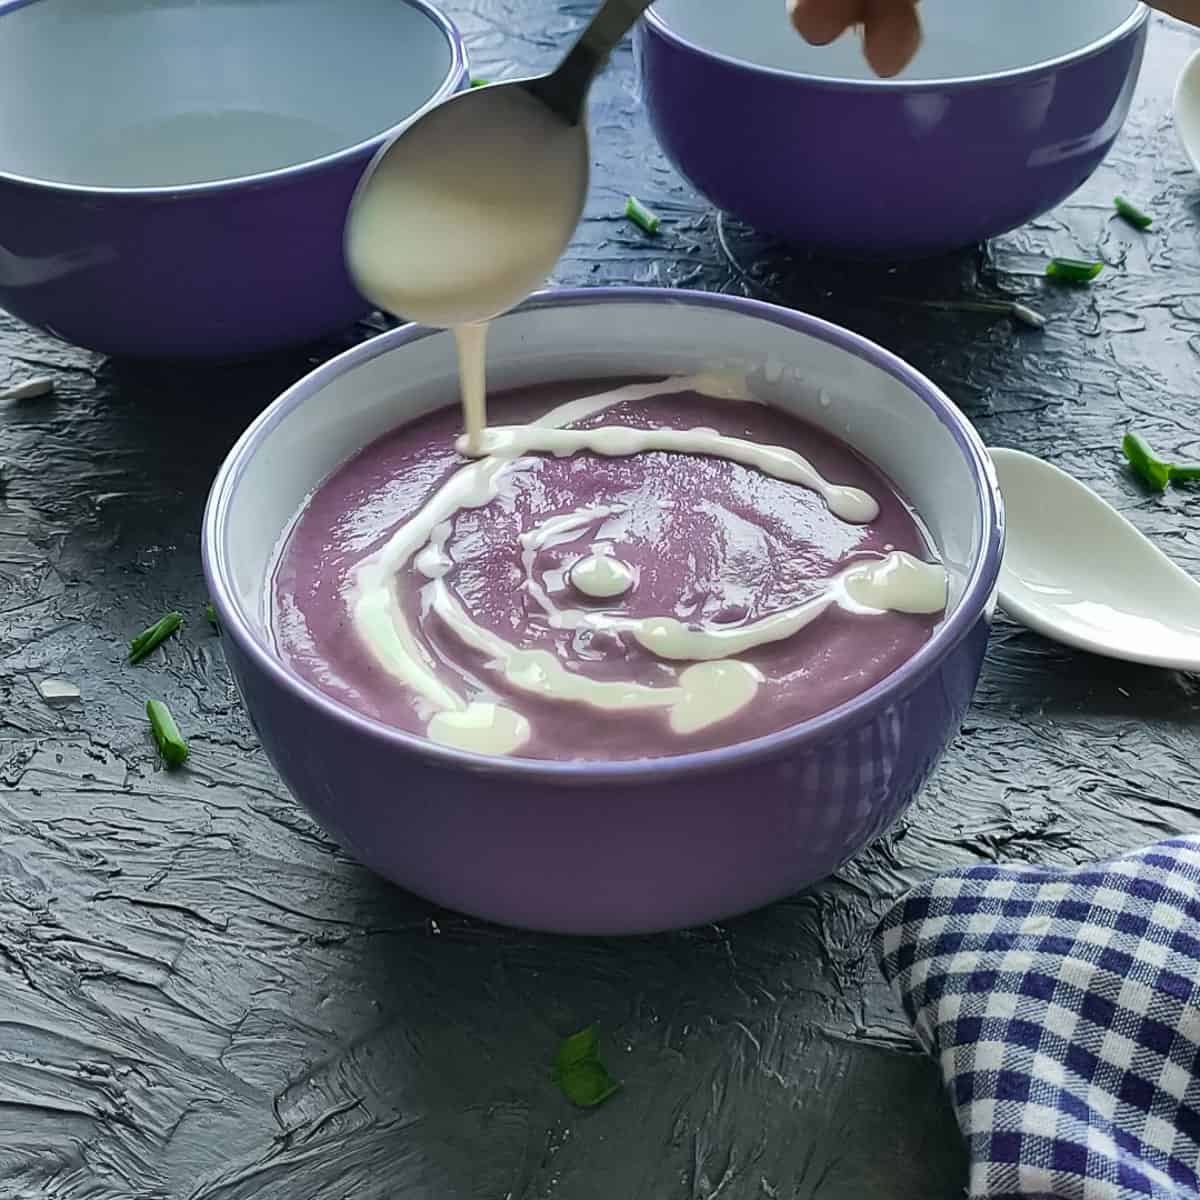 Yogurt with lemon juice being drizzled on red cabbage soup in a white bowl.